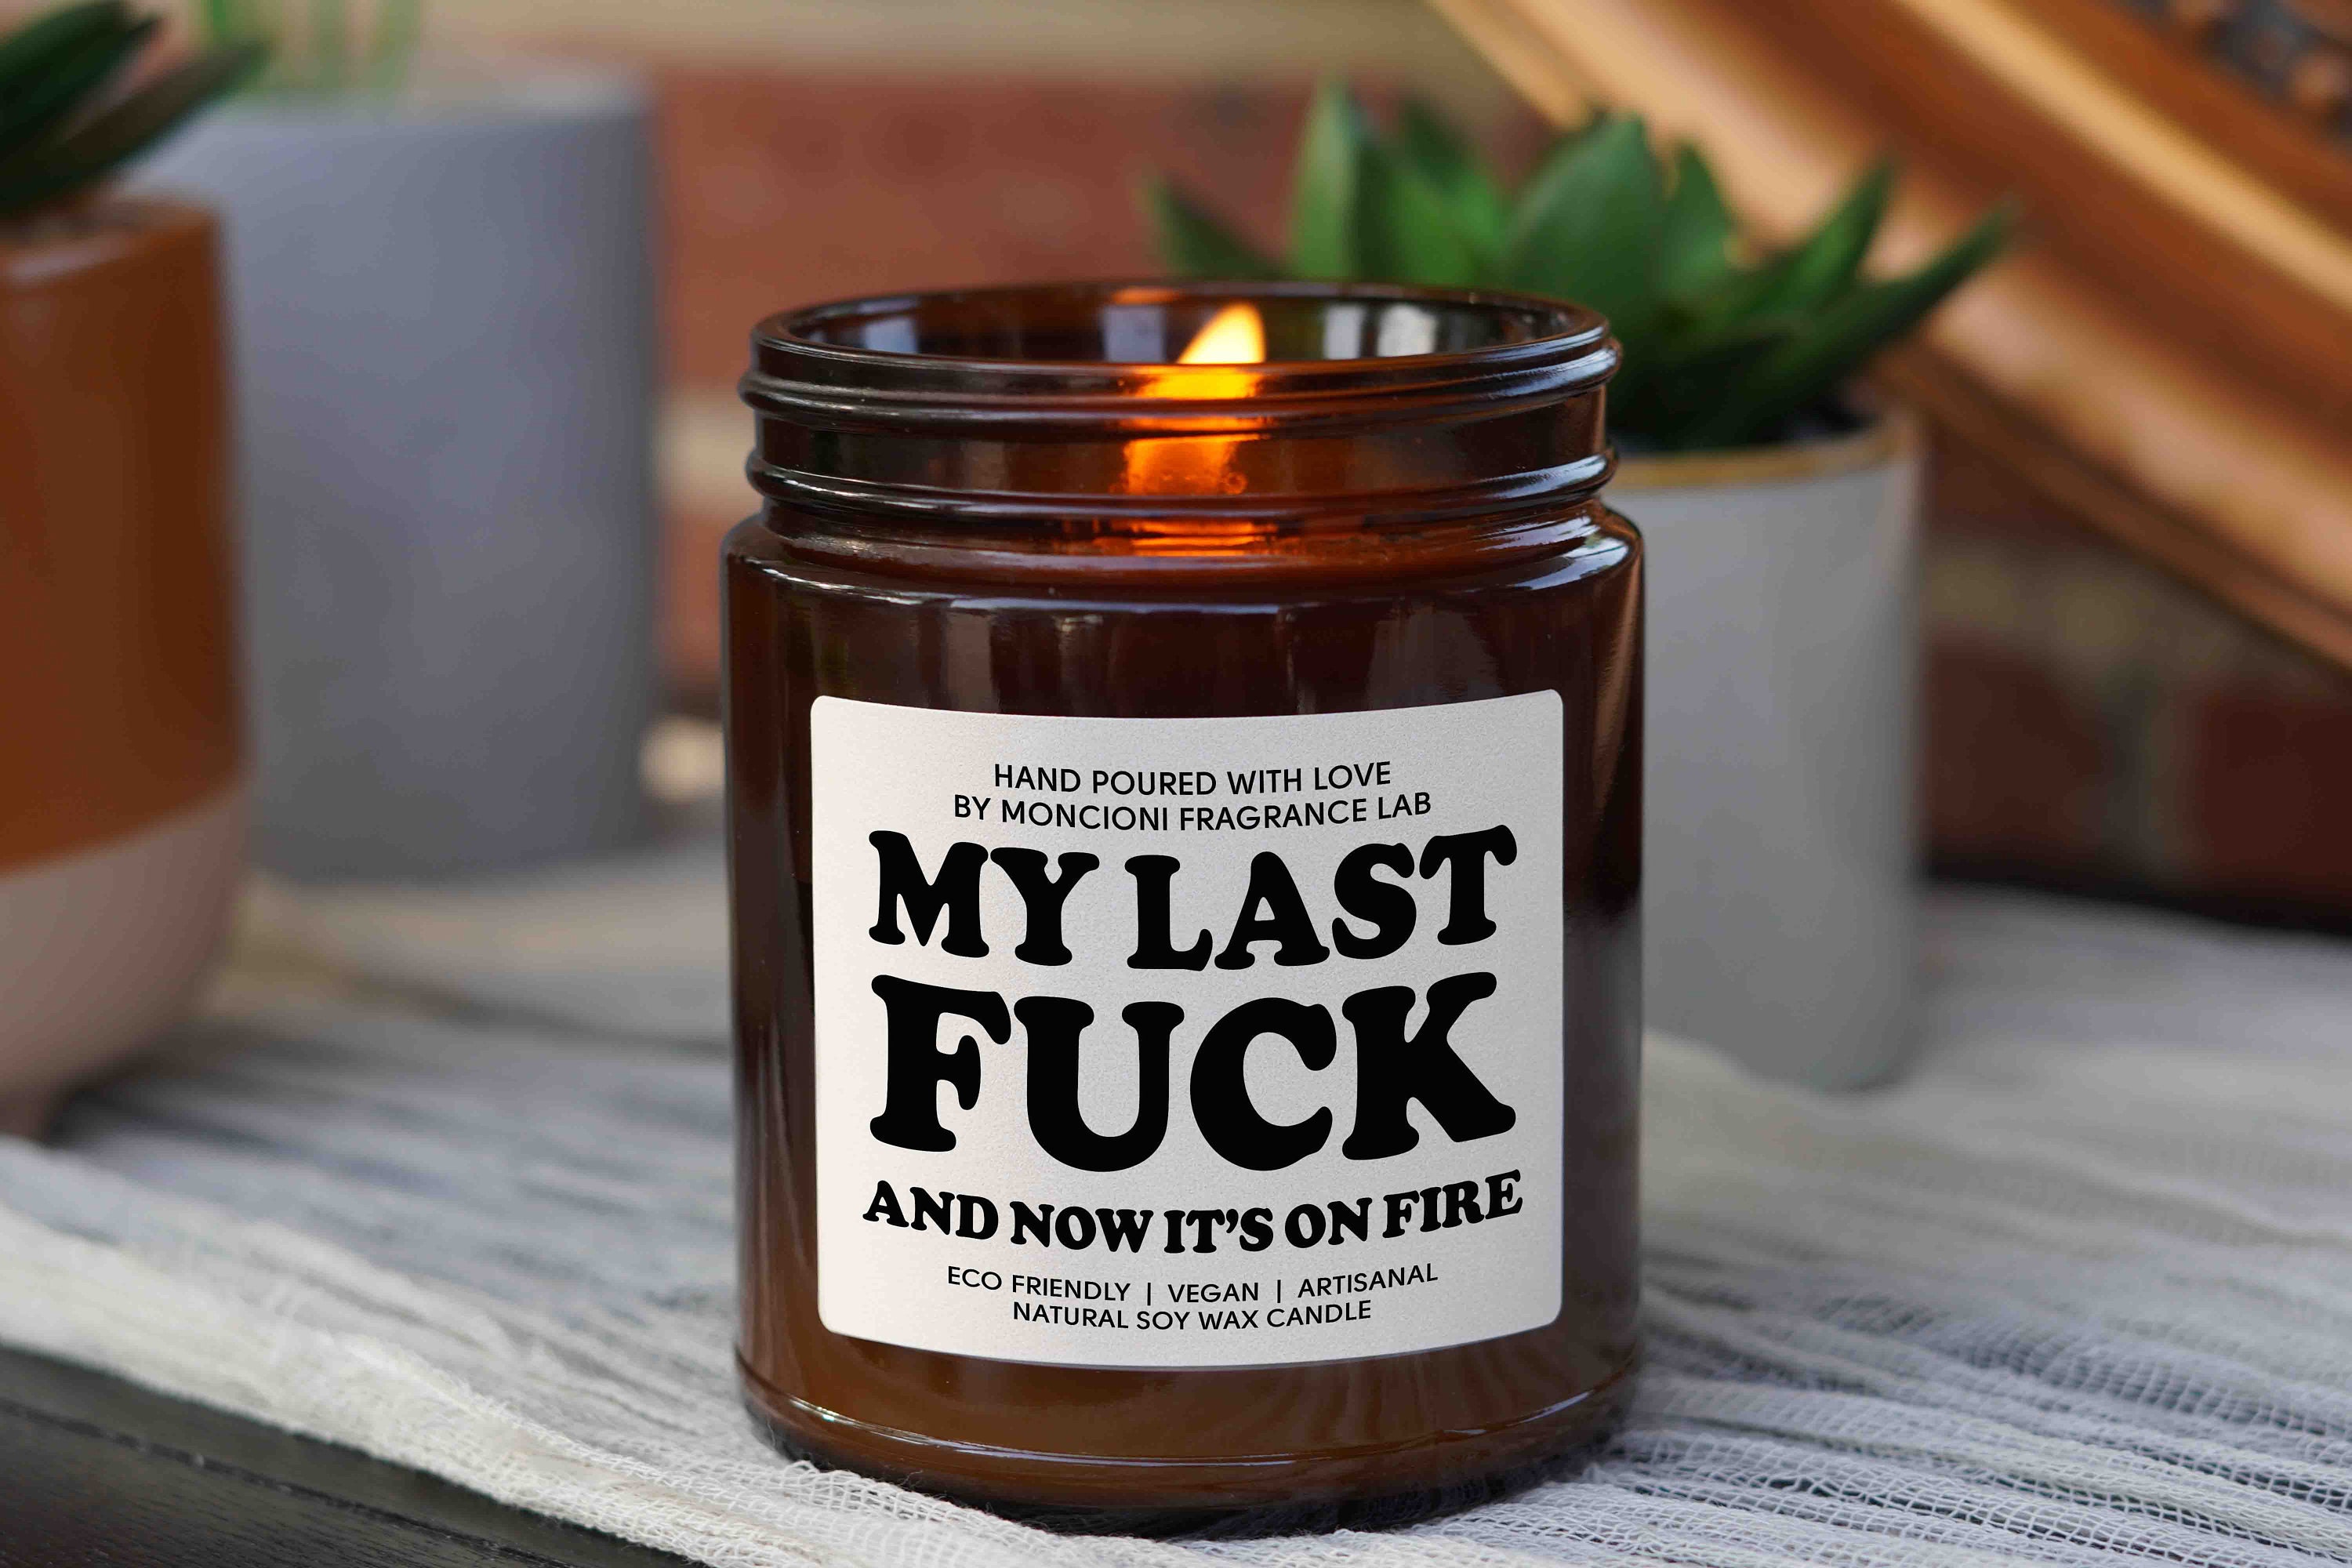 Mother’s Day Gifts for her My last fuck candle Gift scented candles best friend gift for best friend gifts birthday gift for him Soy candles